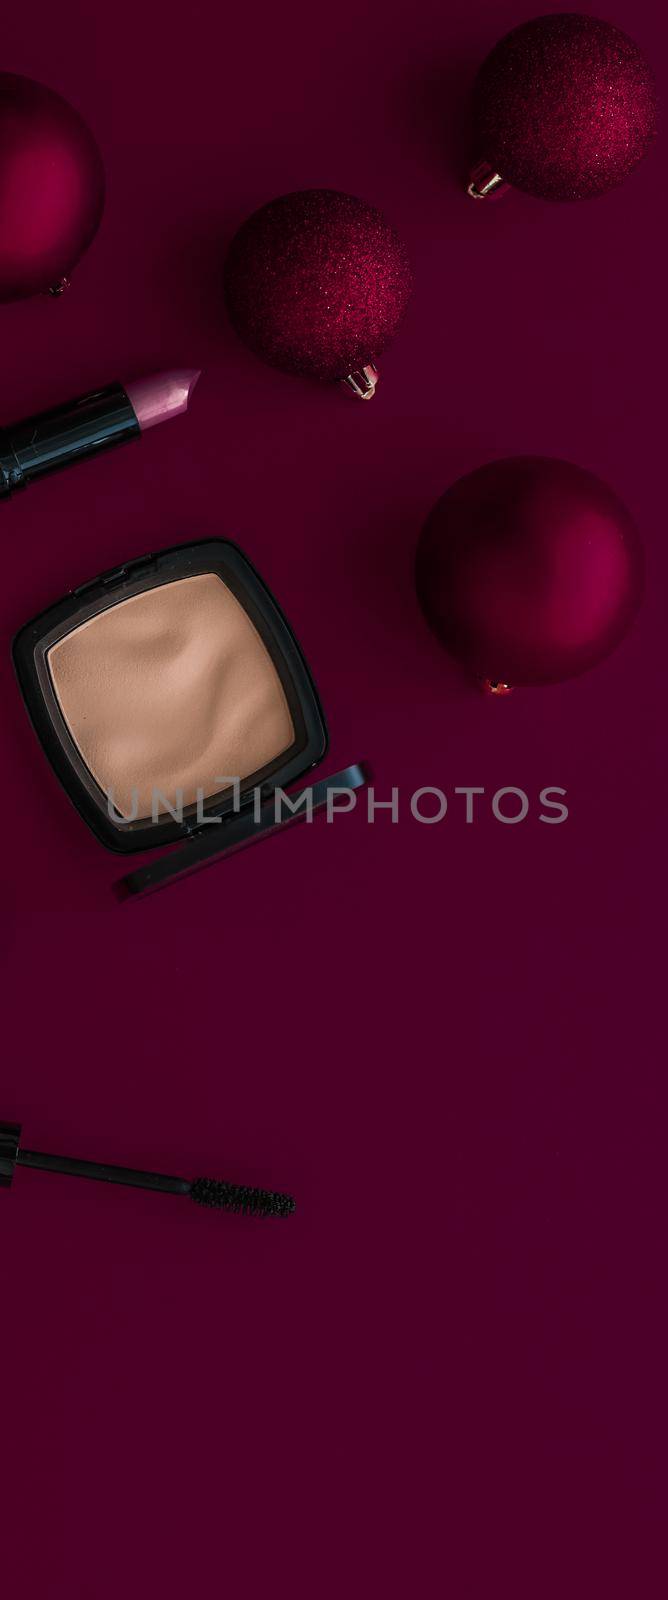 Make-up and cosmetics product set for beauty brand Christmas sale promotion, luxury burgundy flatlay background as holiday design by Anneleven